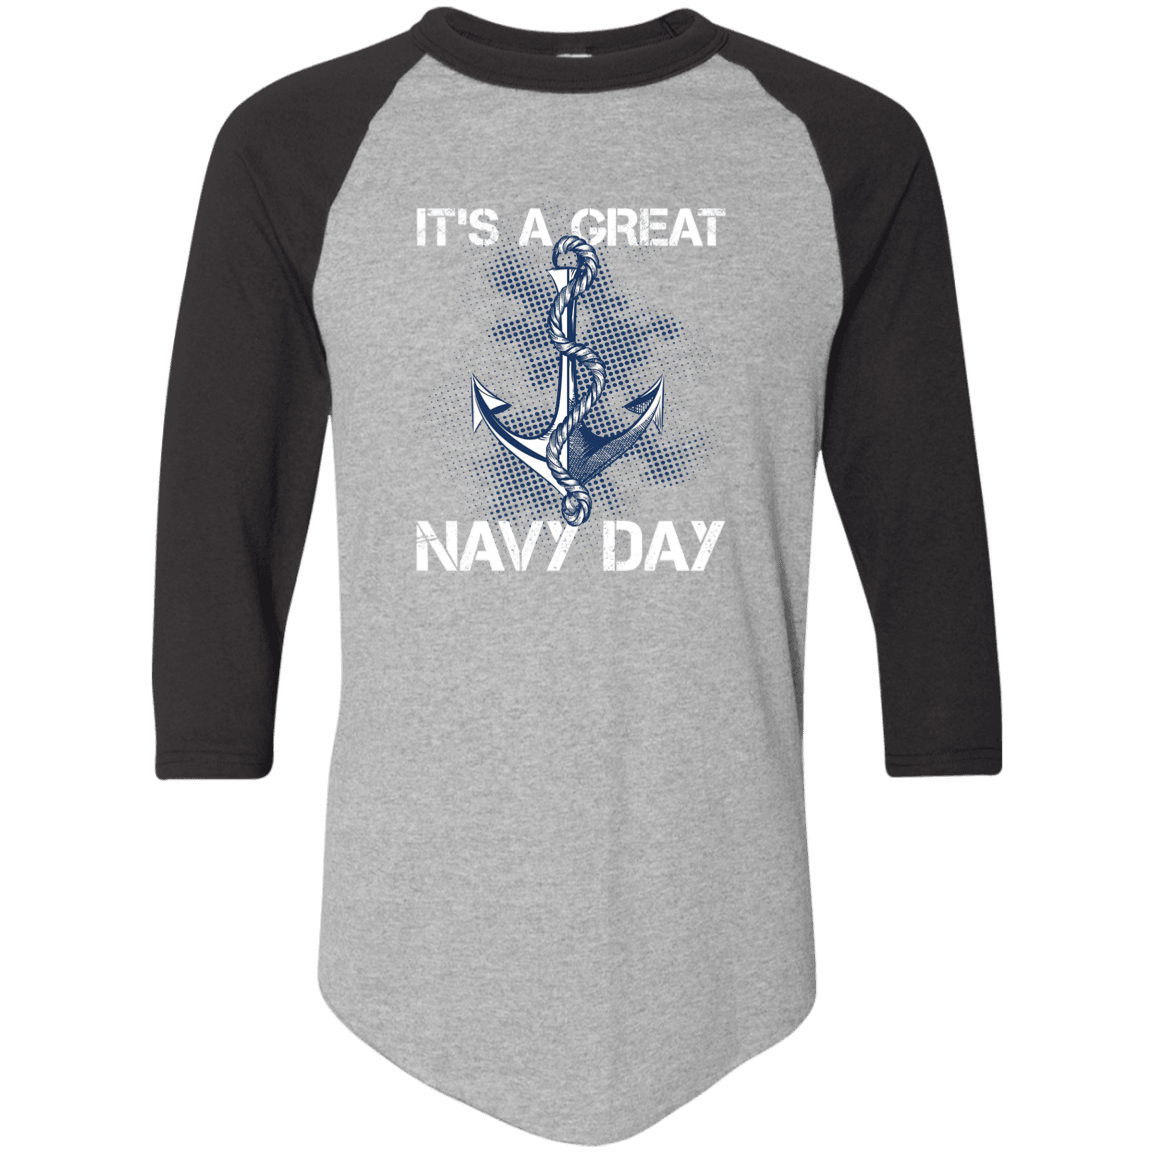 Designs by MyUtopia Shout Out:It's A Great Navy Day 3/4 Length Sleeve Color block Raglan Jersey T-Shirt,Athletic Heather/Black / S,Adult Unisex T-Shirt